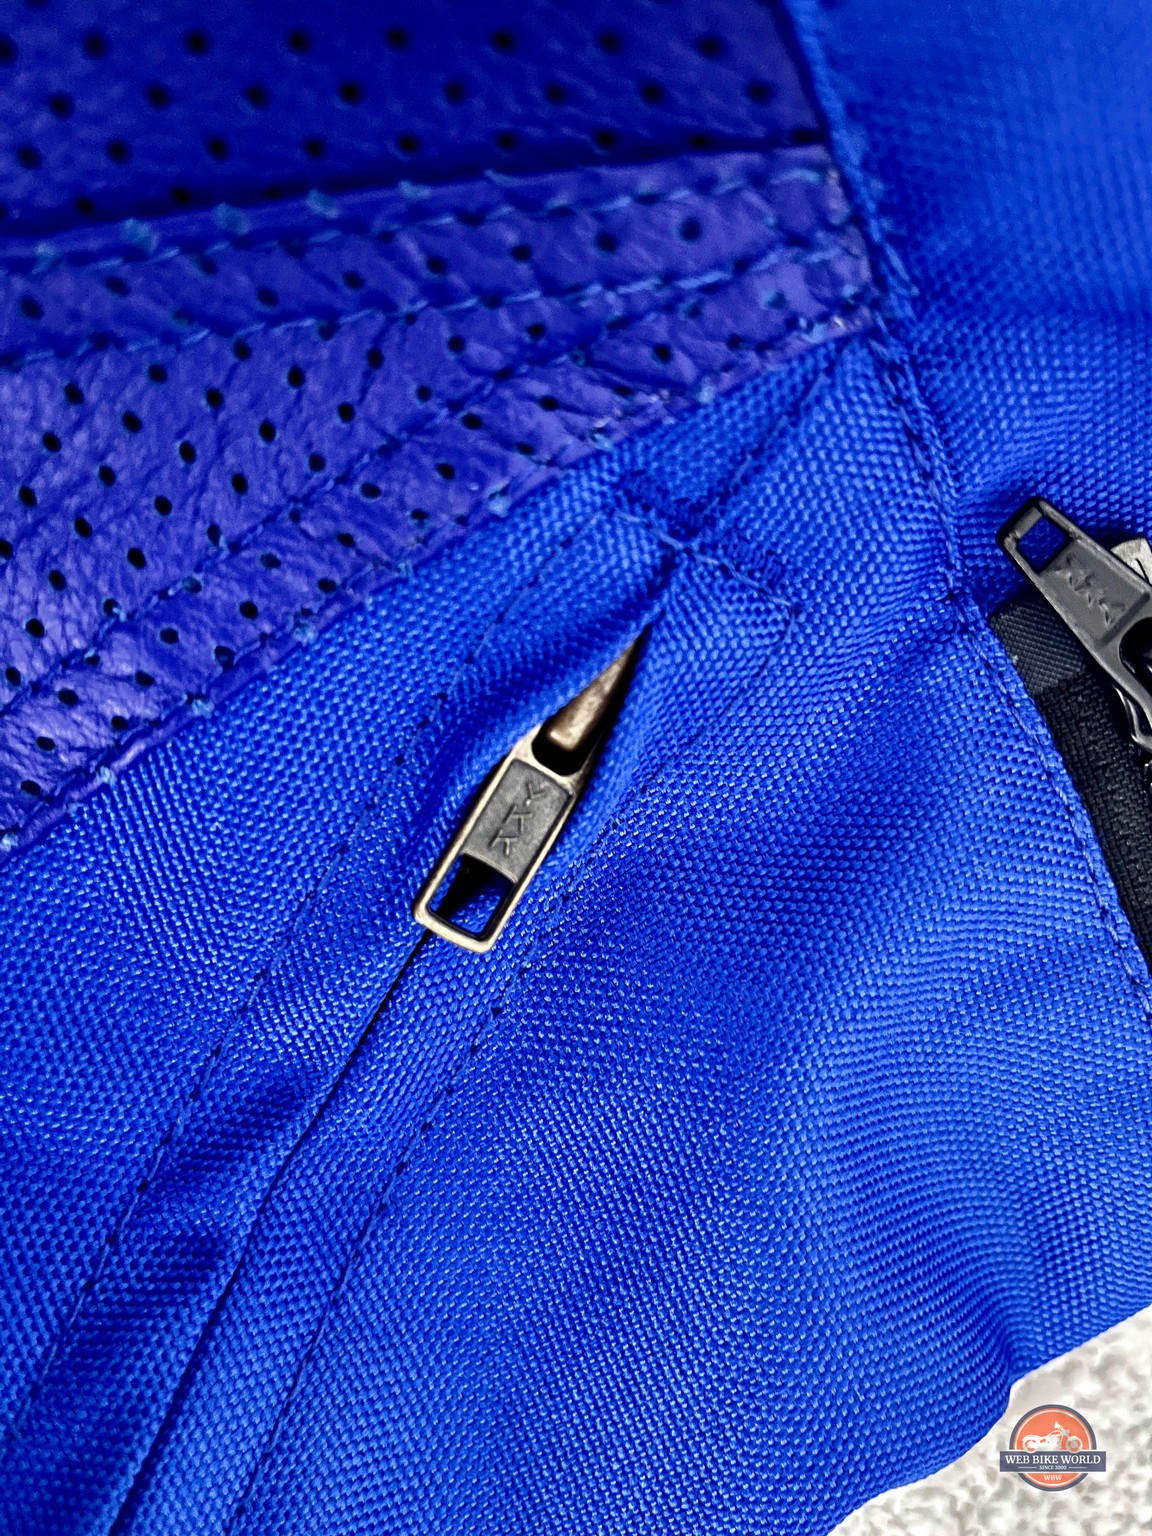 Closeup of the YKK zippers on the pants